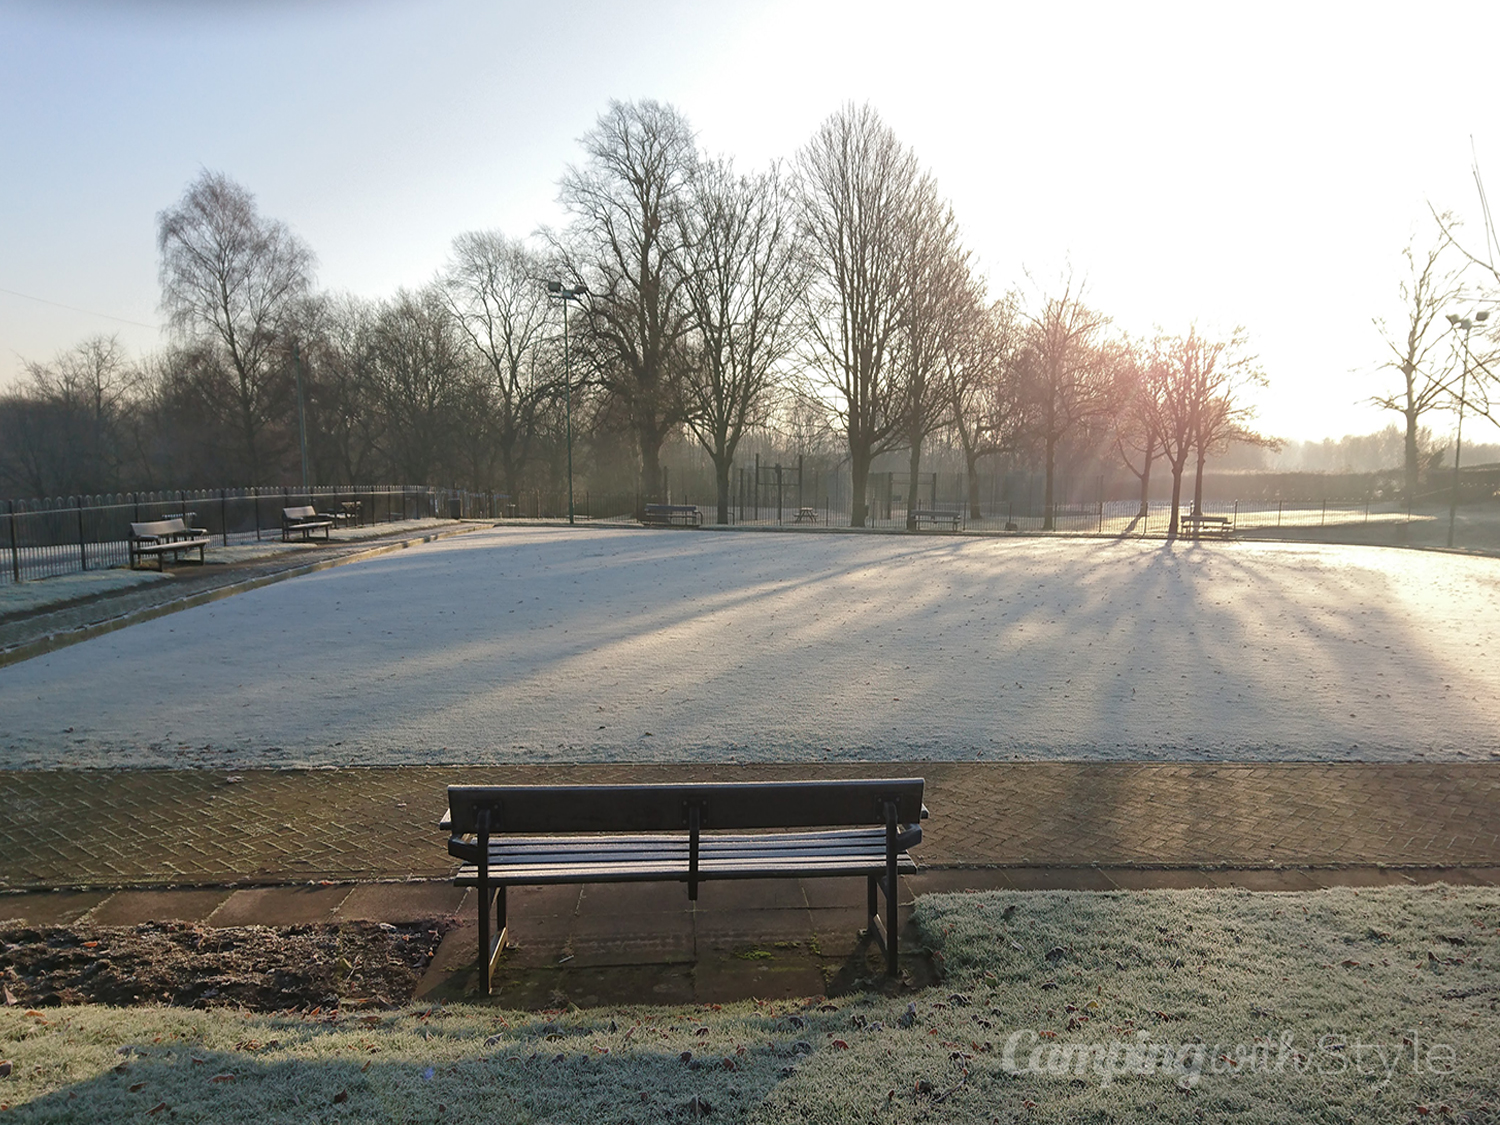 Sandbach town park in Cheshire on a frosty morning in December